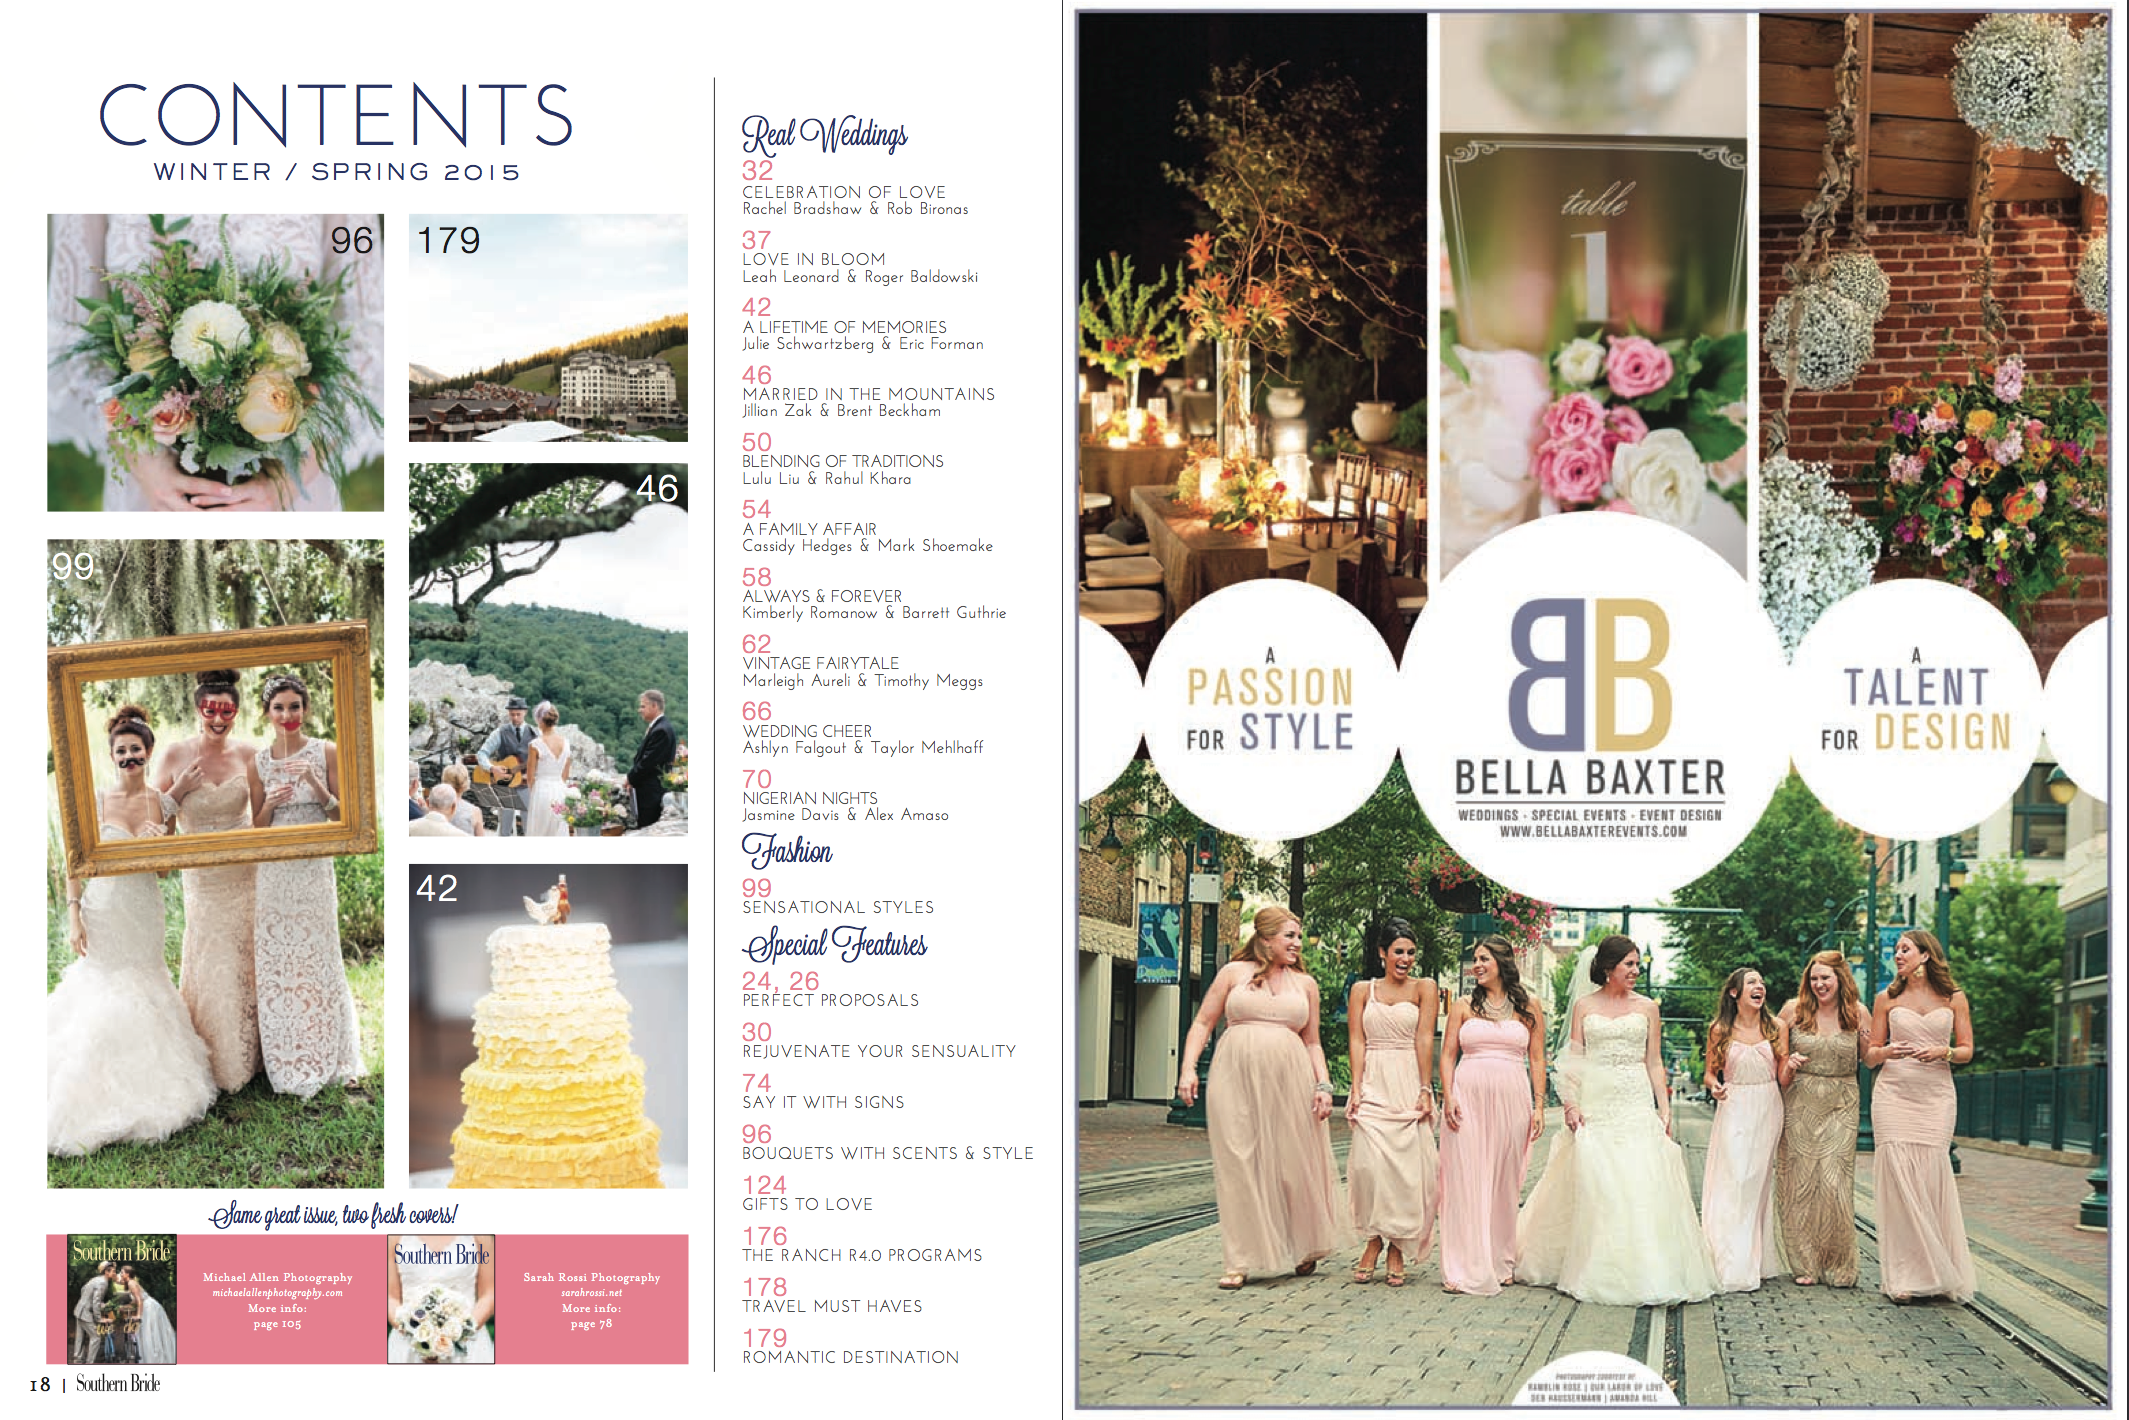 Revival Photography Featured in Southern Bride Magazine 2015 Winter-Spring Issue www.revivalphotography.com